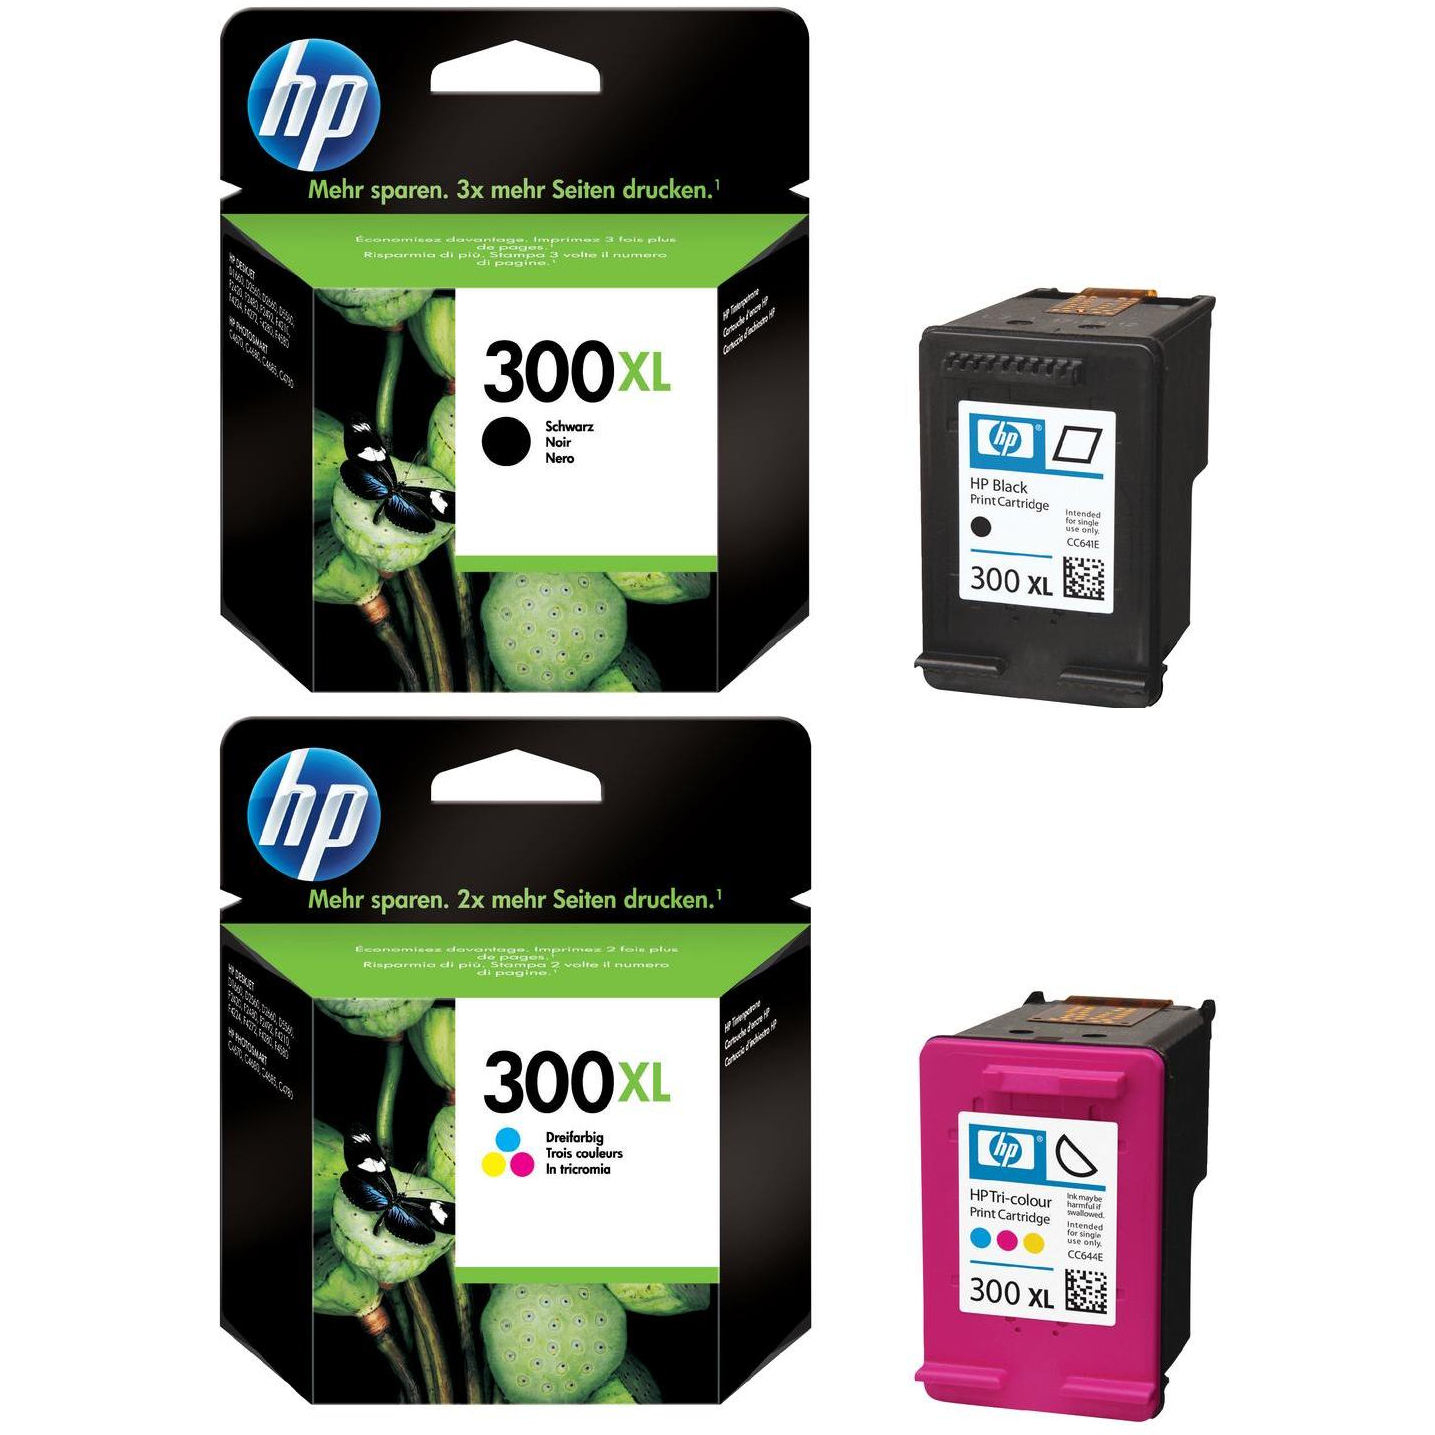 Related to HP CB656B: HP-300XL-Pack